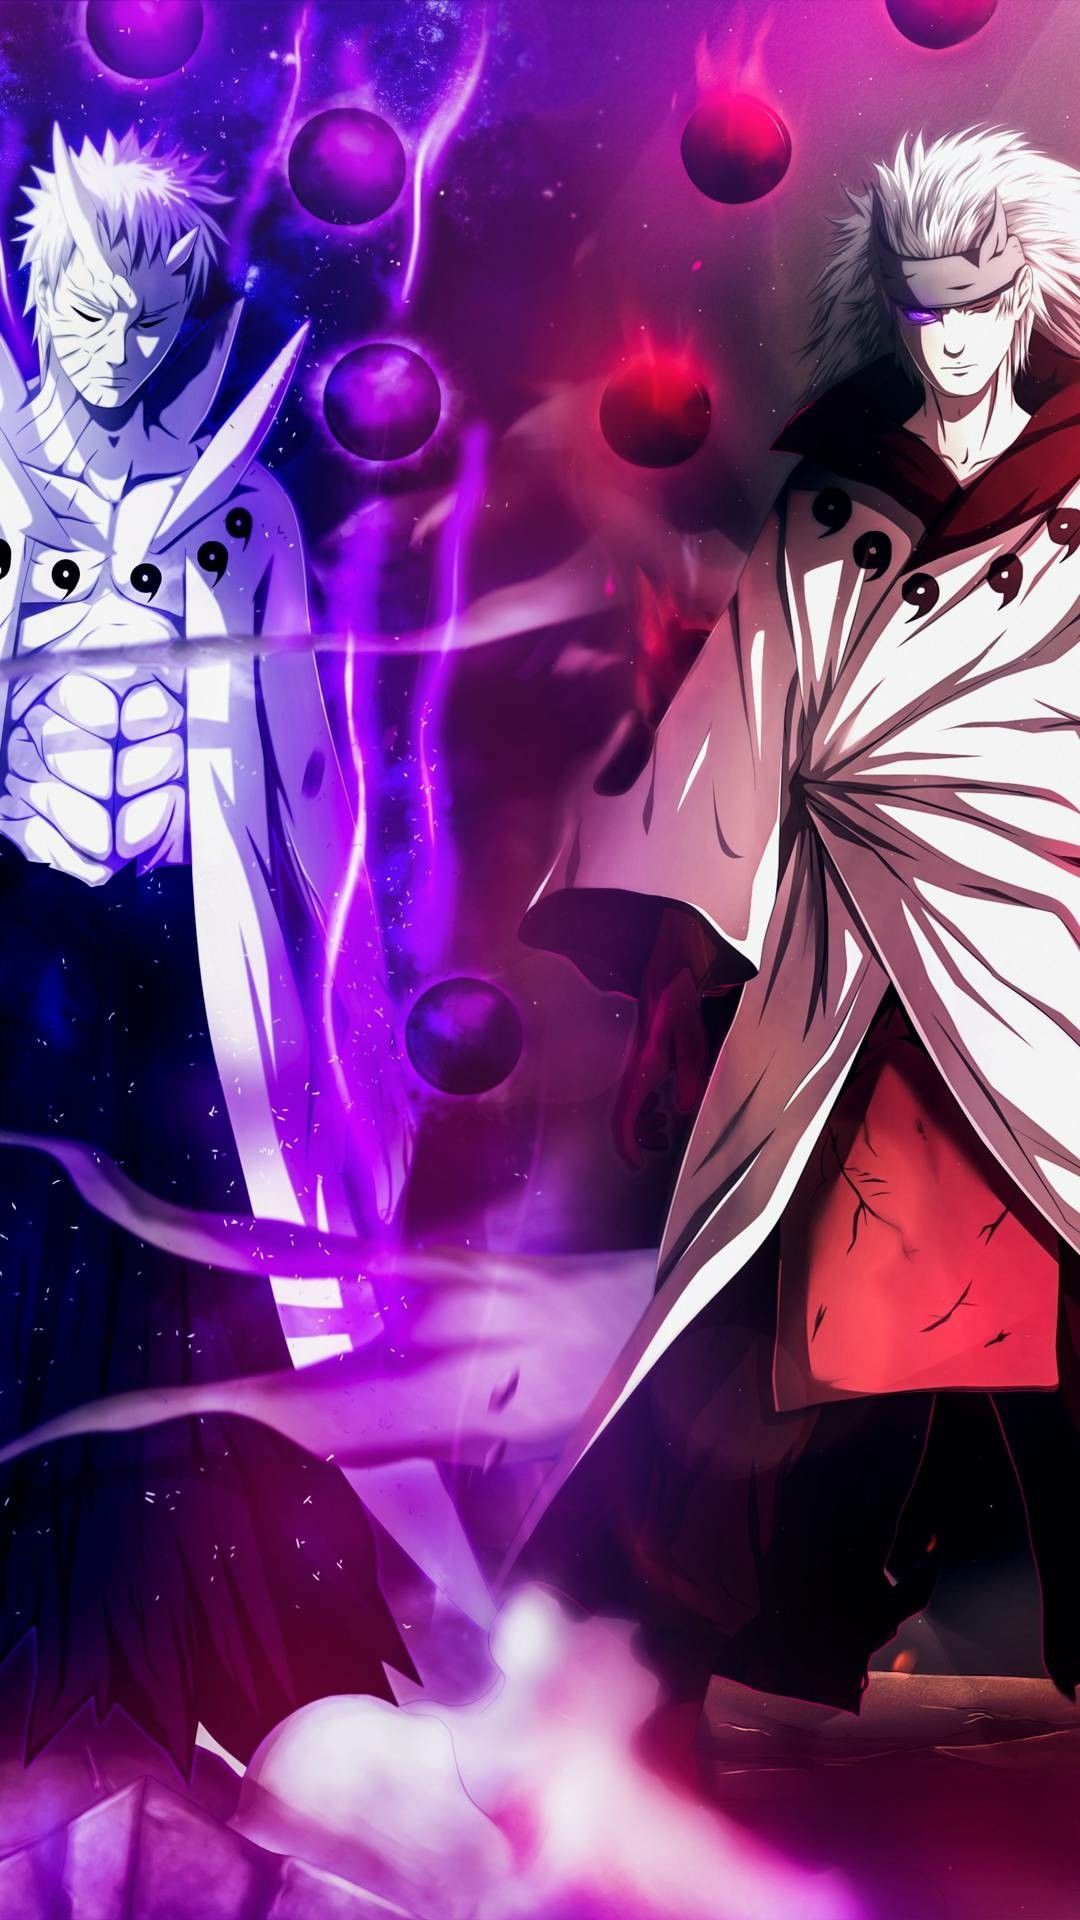 30 Obito Uchiha AppleiPhone 6 750x1334 Wallpapers  Mobile Abyss